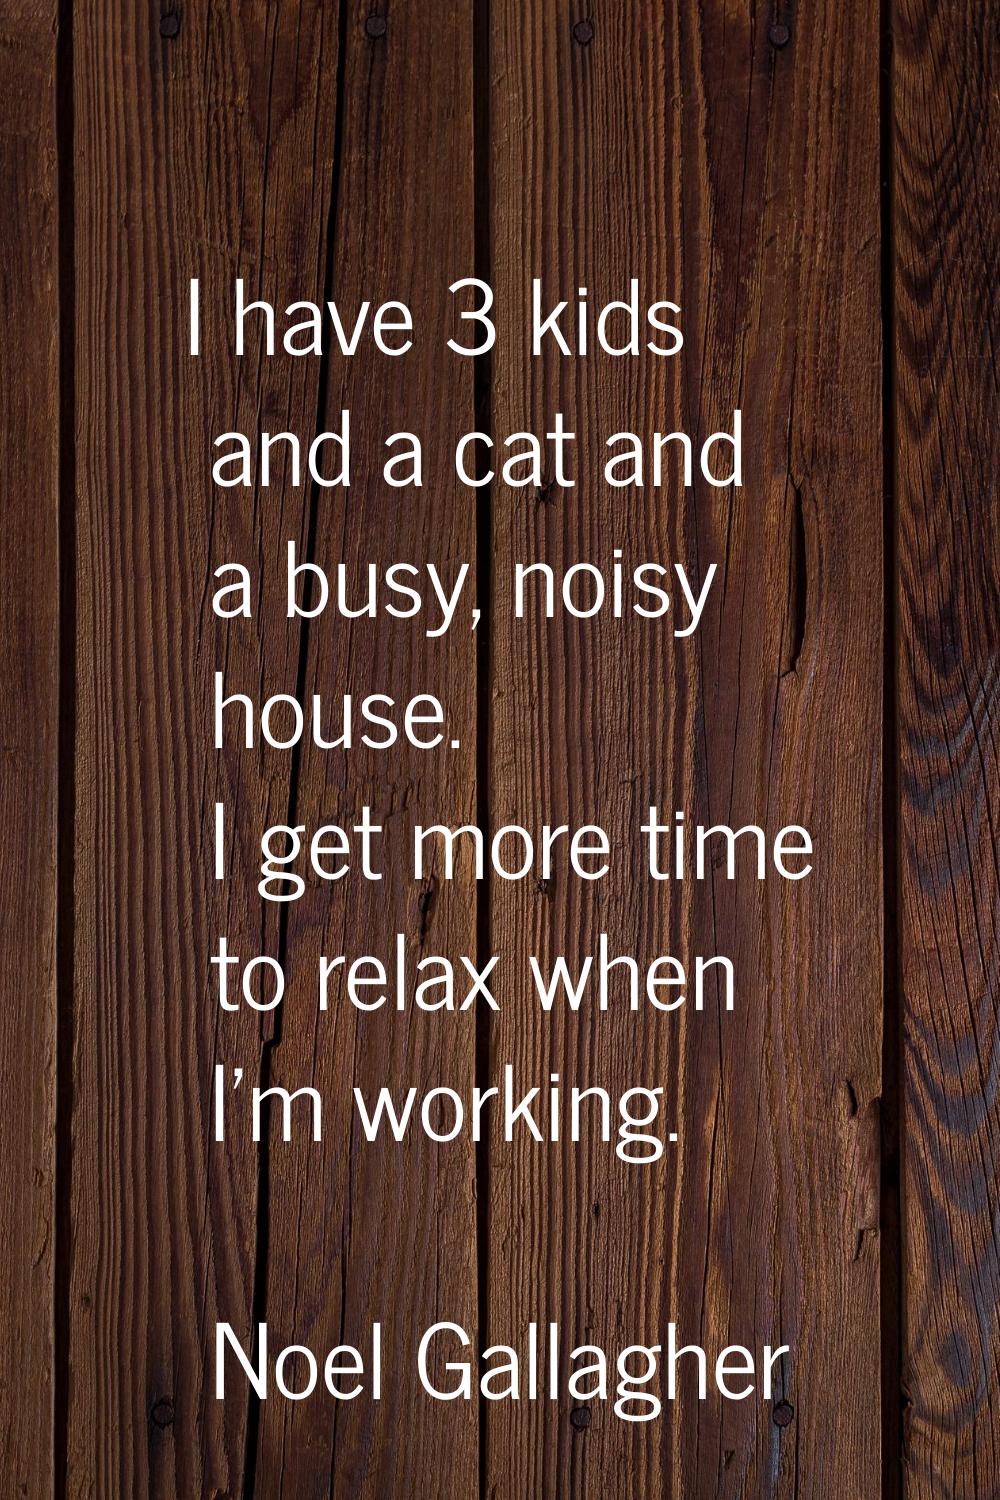 I have 3 kids and a cat and a busy, noisy house. I get more time to relax when I'm working.